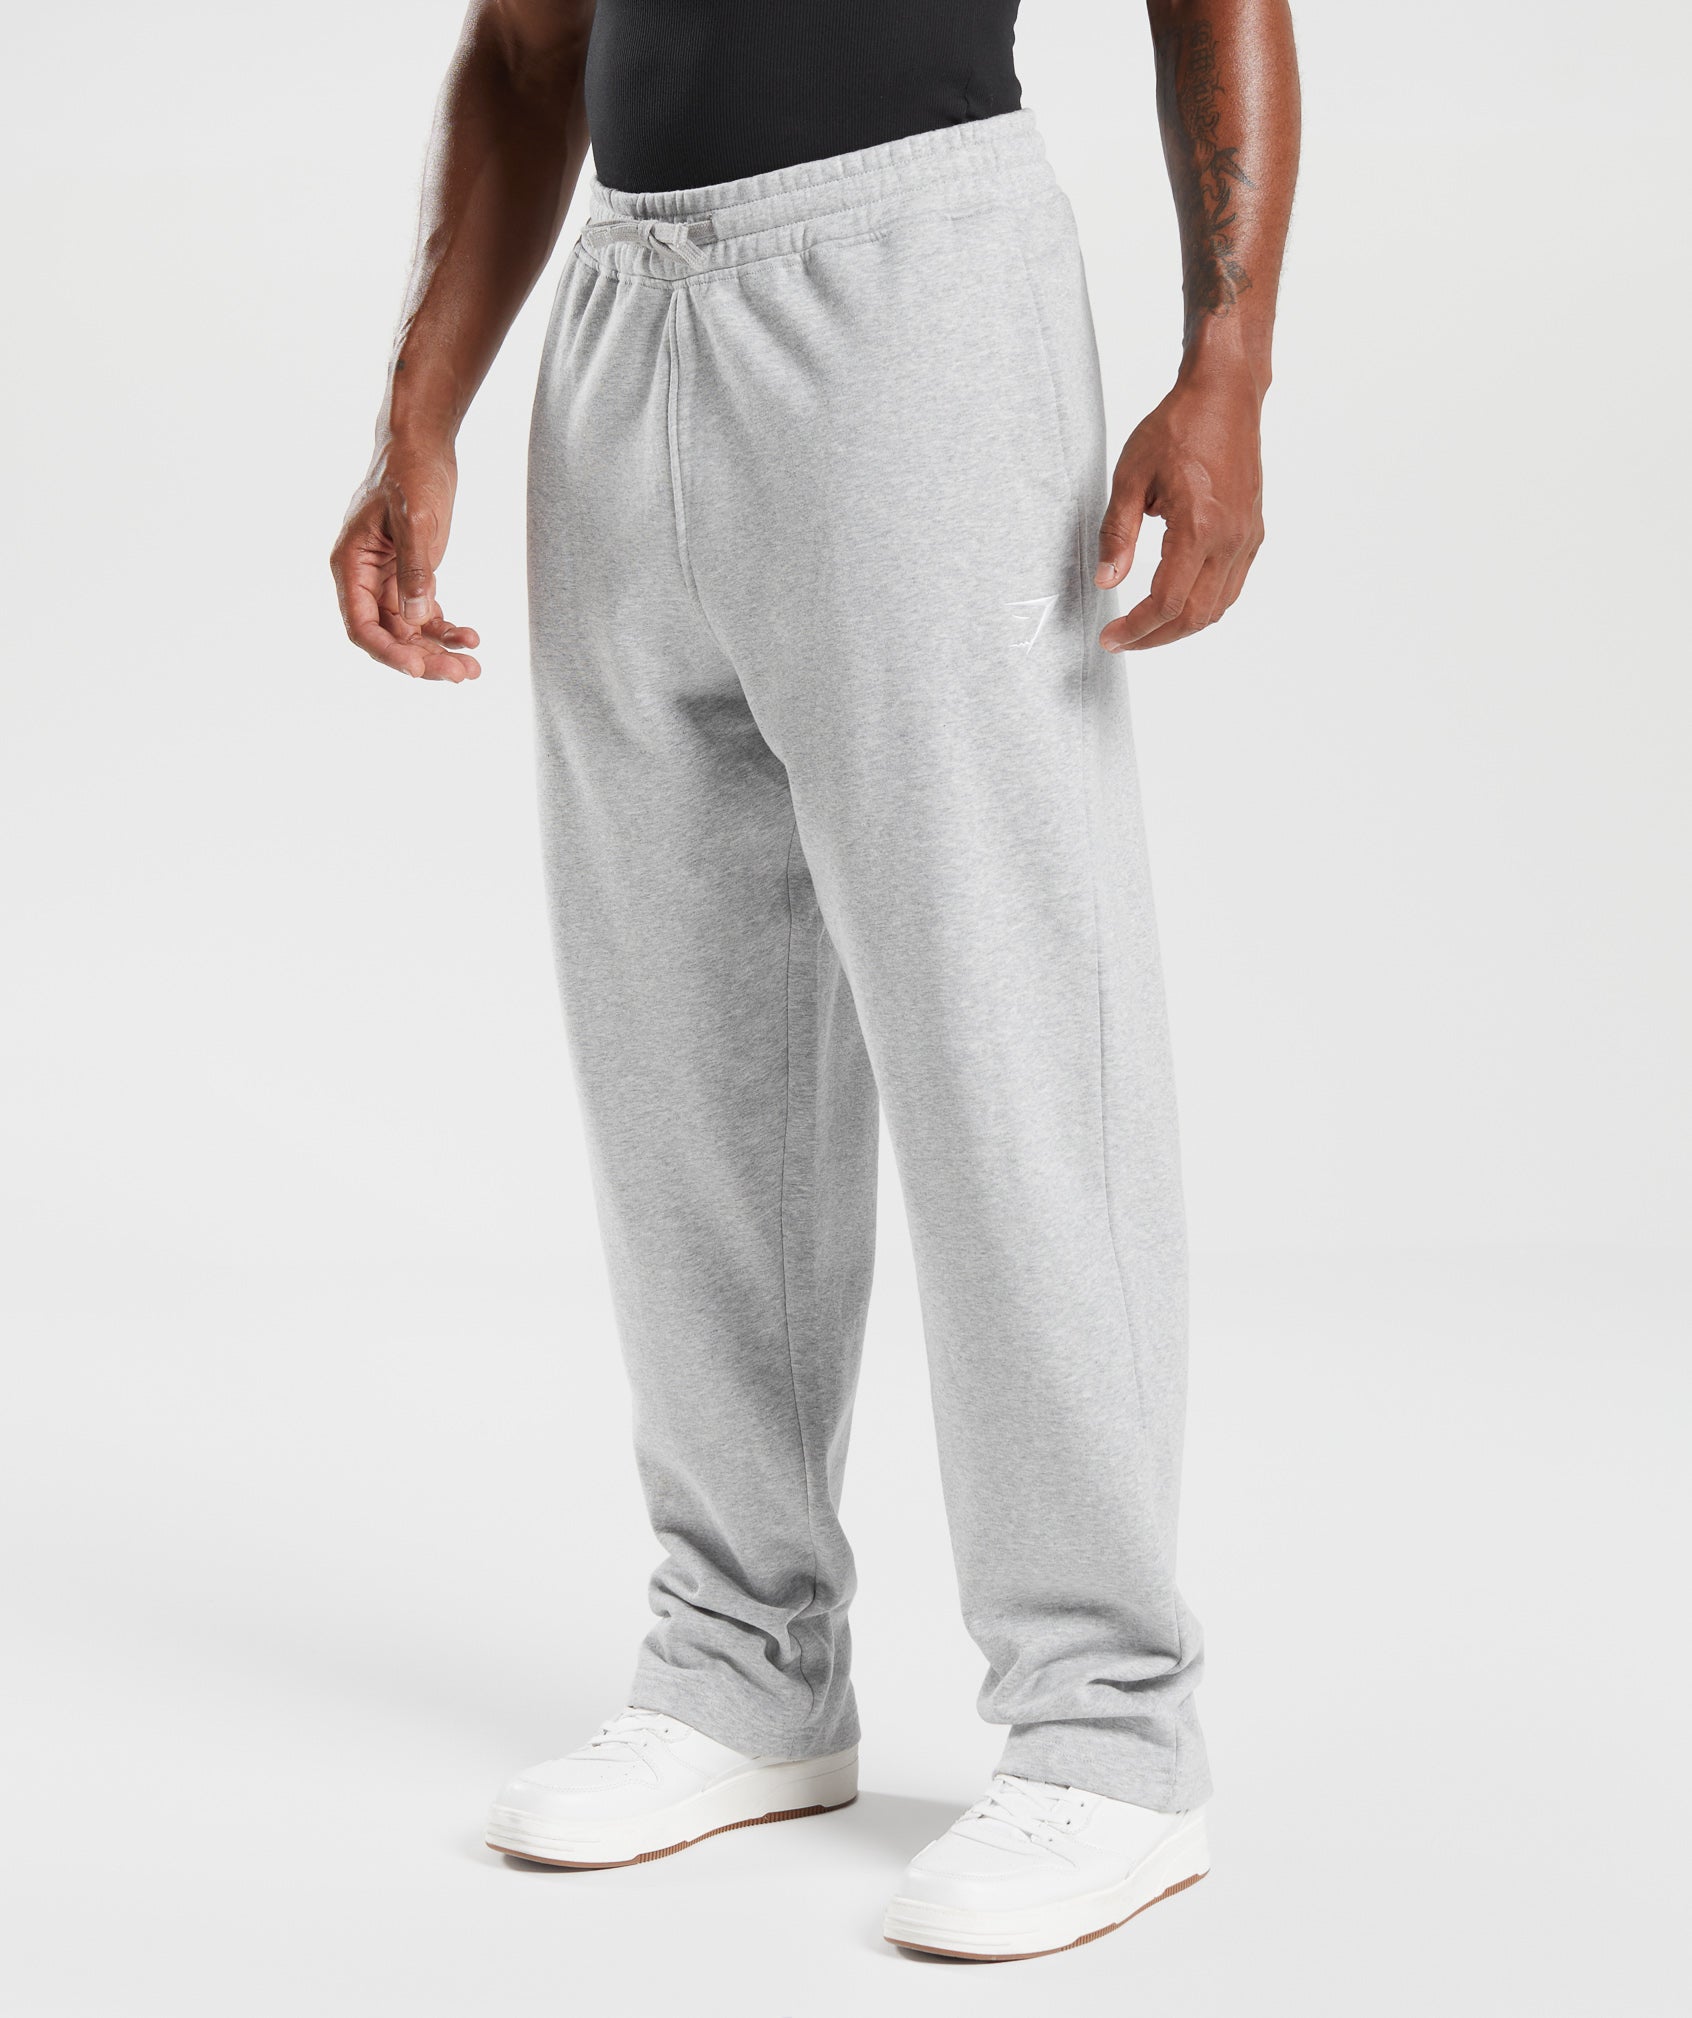 Gymshark Crest Joggers - Truffle Brown